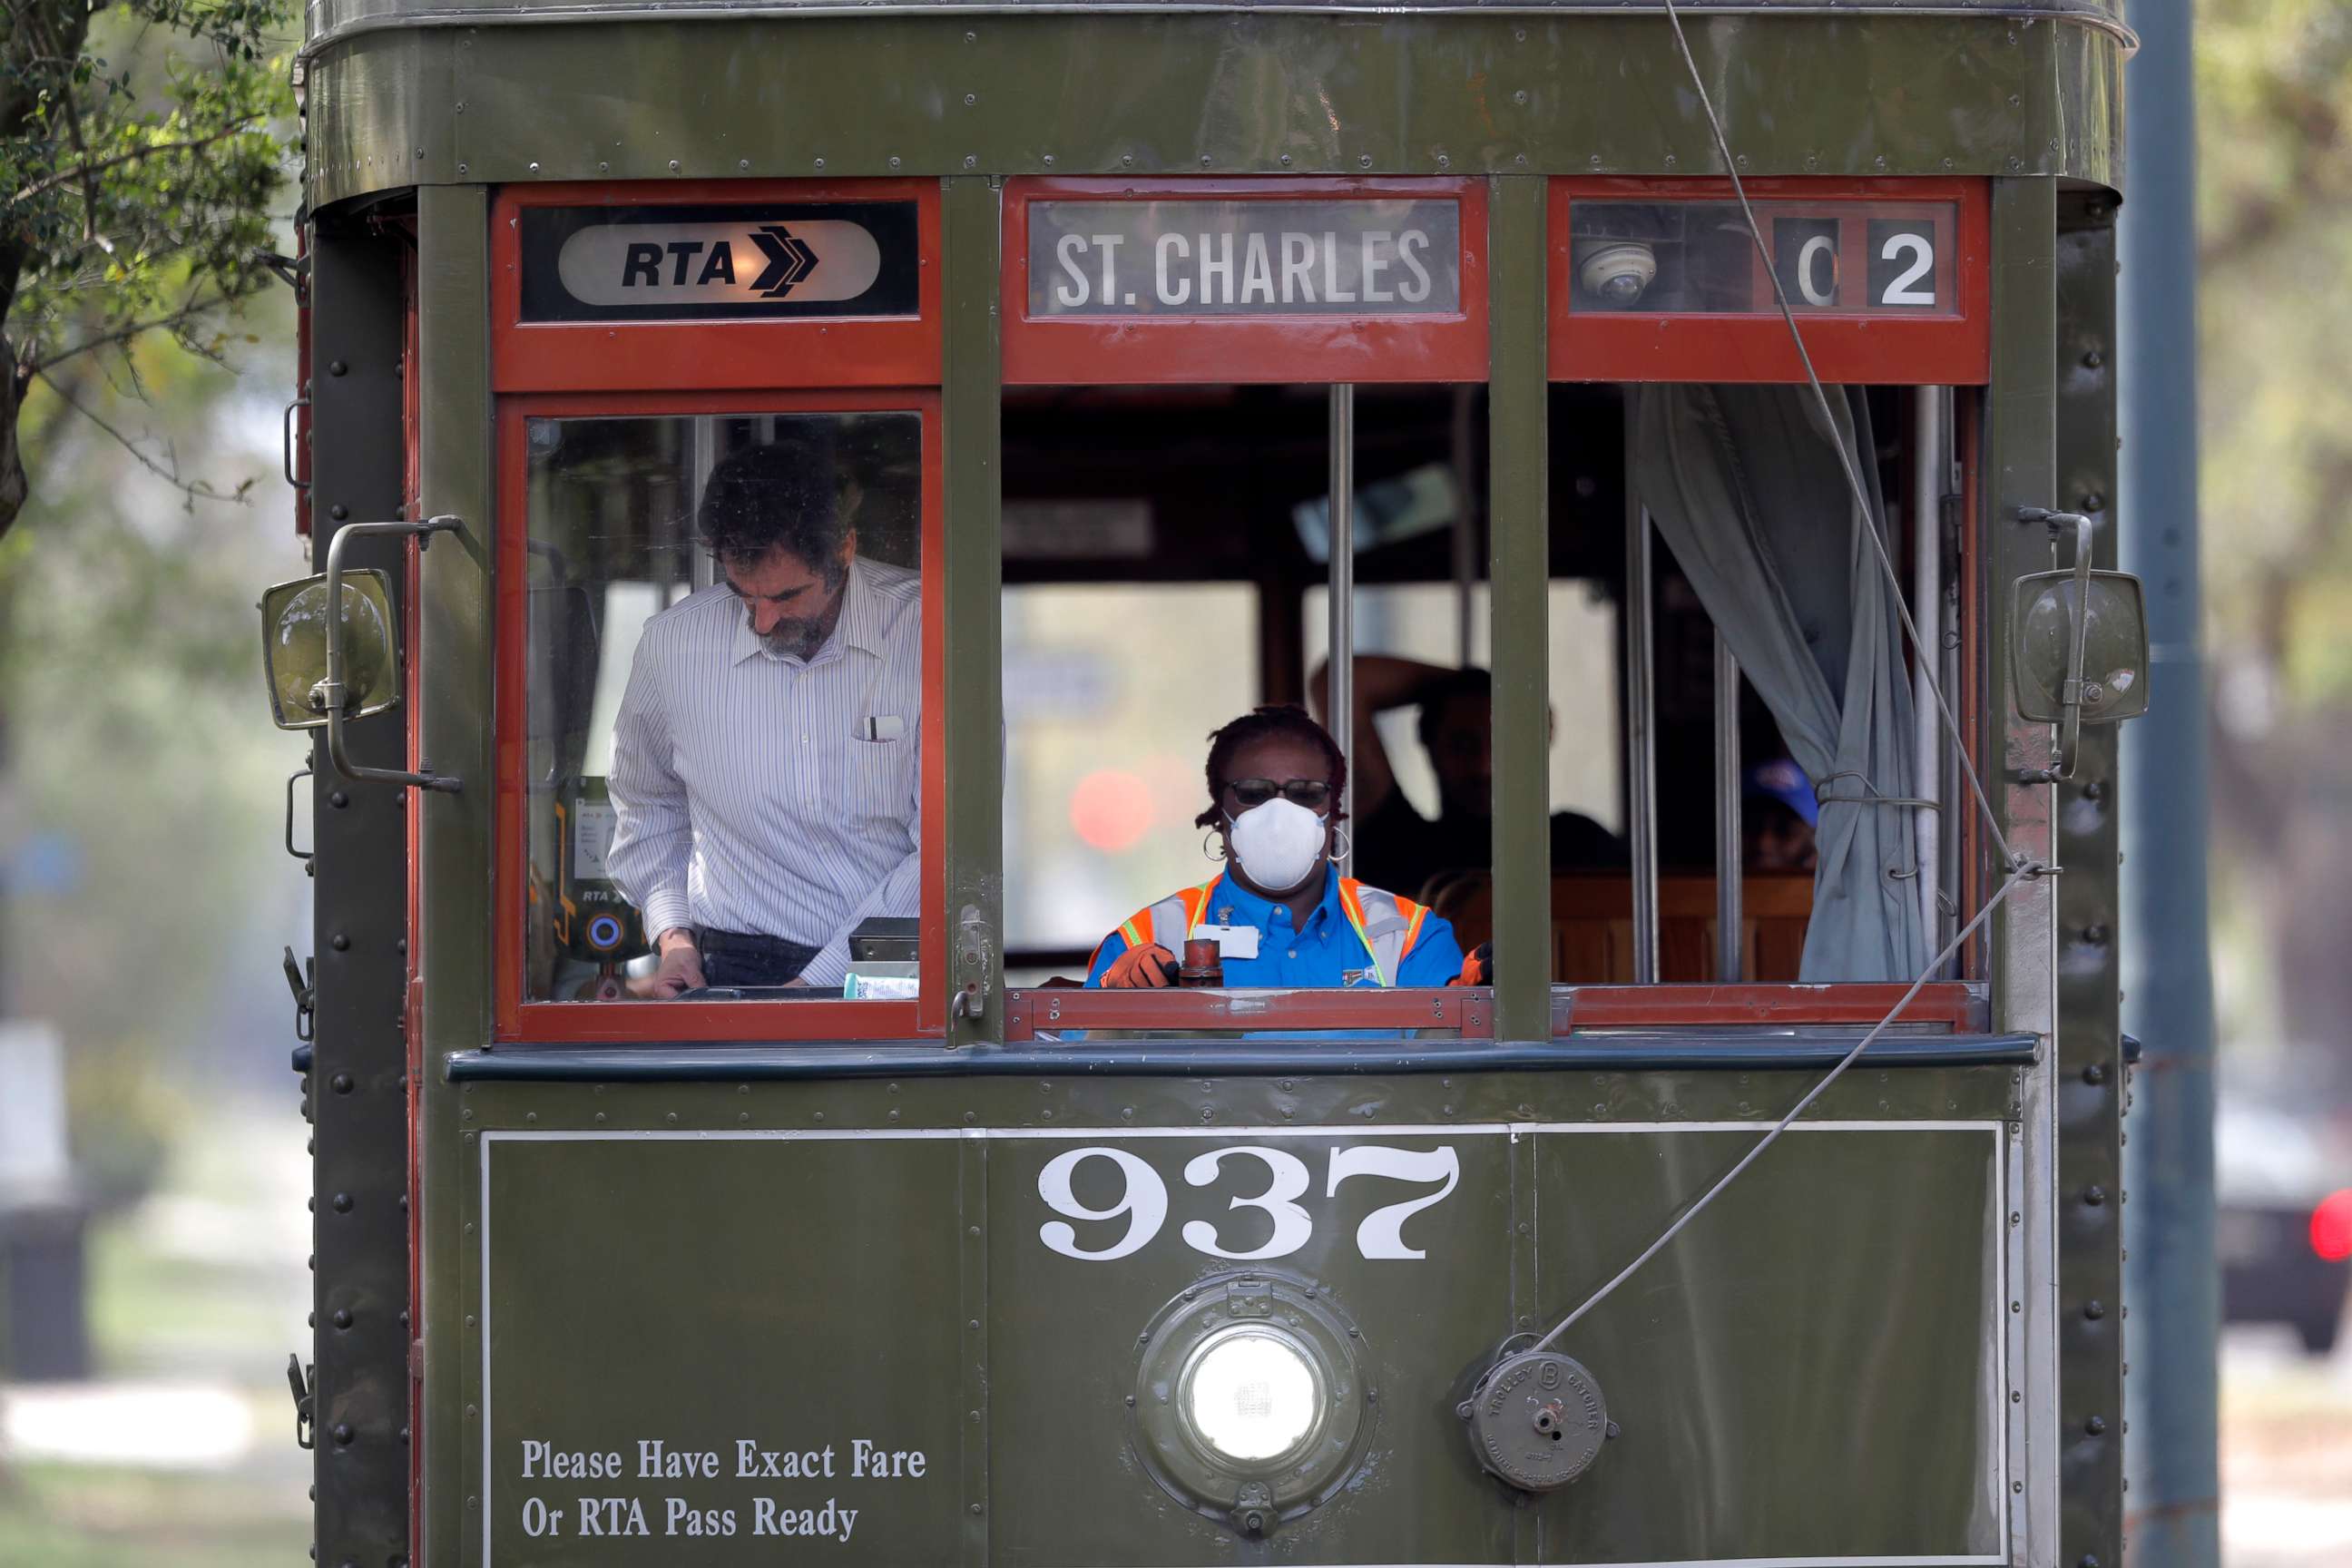 PHOTO: A streetcar conductor wears a mask due to the coronavirus pandemic as she runs her route on St. Charles Ave. in New Orleans, March 19, 2020.